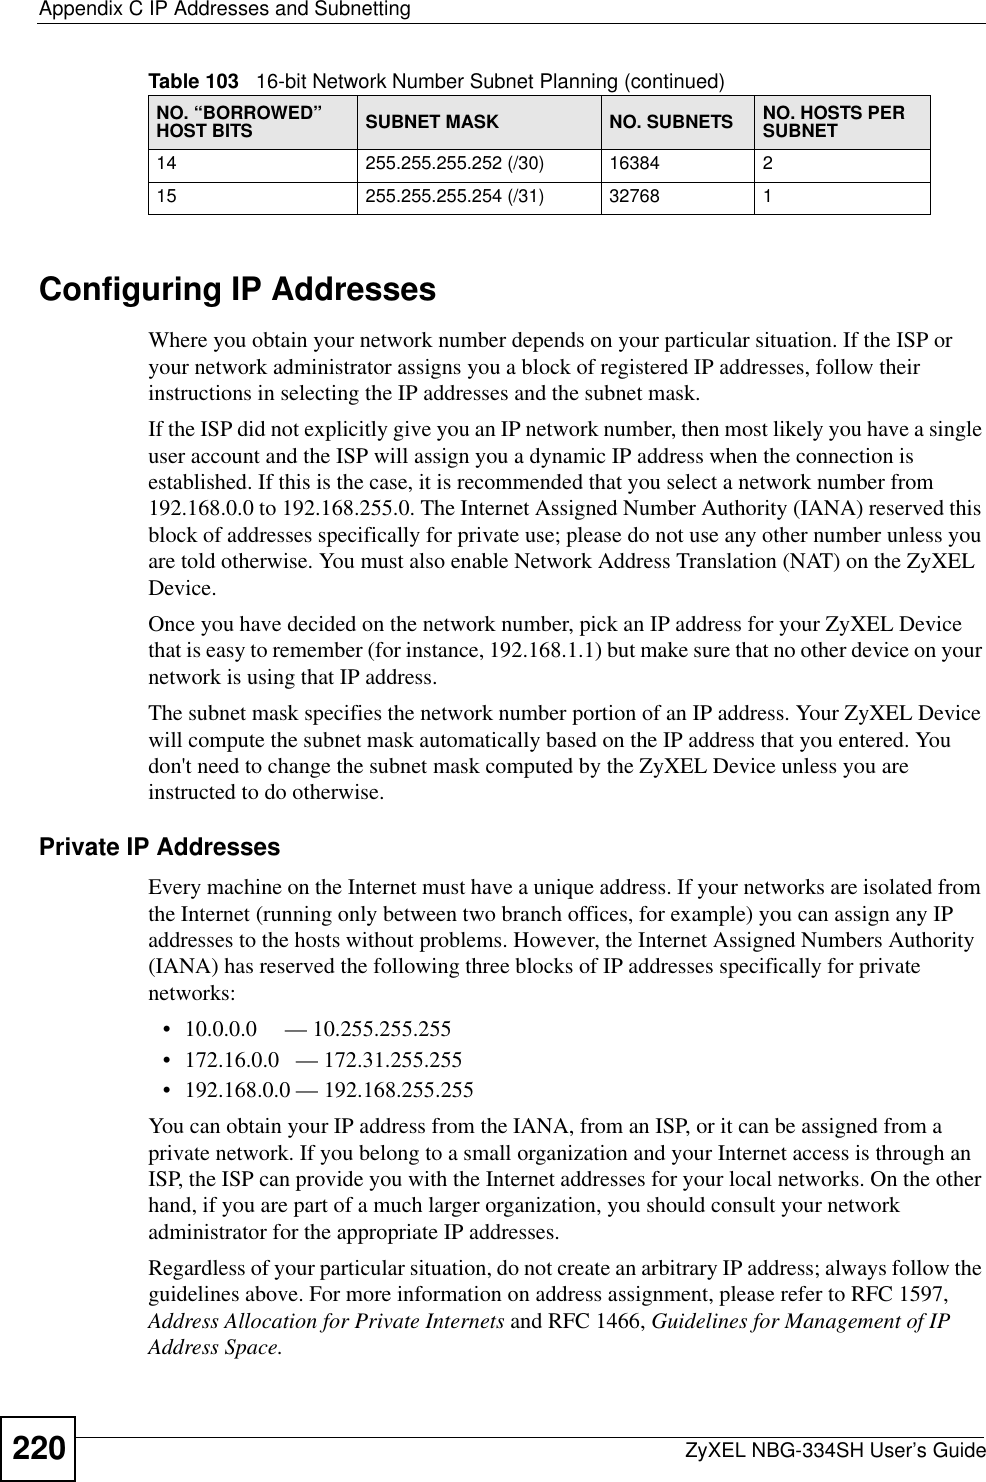 Appendix C IP Addresses and SubnettingZyXEL NBG-334SH User’s Guide220Configuring IP AddressesWhere you obtain your network number depends on your particular situation. If the ISP or your network administrator assigns you a block of registered IP addresses, follow their instructions in selecting the IP addresses and the subnet mask.If the ISP did not explicitly give you an IP network number, then most likely you have a single user account and the ISP will assign you a dynamic IP address when the connection is established. If this is the case, it is recommended that you select a network number from 192.168.0.0 to 192.168.255.0. The Internet Assigned Number Authority (IANA) reserved this block of addresses specifically for private use; please do not use any other number unless you are told otherwise. You must also enable Network Address Translation (NAT) on the ZyXEL Device.Once you have decided on the network number, pick an IP address for your ZyXEL Device that is easy to remember (for instance, 192.168.1.1) but make sure that no other device on your network is using that IP address.The subnet mask specifies the network number portion of an IP address. Your ZyXEL Device will compute the subnet mask automatically based on the IP address that you entered. You don&apos;t need to change the subnet mask computed by the ZyXEL Device unless you are instructed to do otherwise.Private IP AddressesEvery machine on the Internet must have a unique address. If your networks are isolated from the Internet (running only between two branch offices, for example) you can assign any IP addresses to the hosts without problems. However, the Internet Assigned Numbers Authority (IANA) has reserved the following three blocks of IP addresses specifically for private networks:• 10.0.0.0     — 10.255.255.255• 172.16.0.0   — 172.31.255.255• 192.168.0.0 — 192.168.255.255You can obtain your IP address from the IANA, from an ISP, or it can be assigned from a private network. If you belong to a small organization and your Internet access is through an ISP, the ISP can provide you with the Internet addresses for your local networks. On the other hand, if you are part of a much larger organization, you should consult your network administrator for the appropriate IP addresses.Regardless of your particular situation, do not create an arbitrary IP address; always follow the guidelines above. For more information on address assignment, please refer to RFC 1597, Address Allocation for Private Internets and RFC 1466, Guidelines for Management of IP Address Space.14 255.255.255.252 (/30) 16384 215 255.255.255.254 (/31) 32768 1Table 103   16-bit Network Number Subnet Planning (continued)NO. “BORROWED” HOST BITS SUBNET MASK NO. SUBNETS NO. HOSTS PER SUBNET